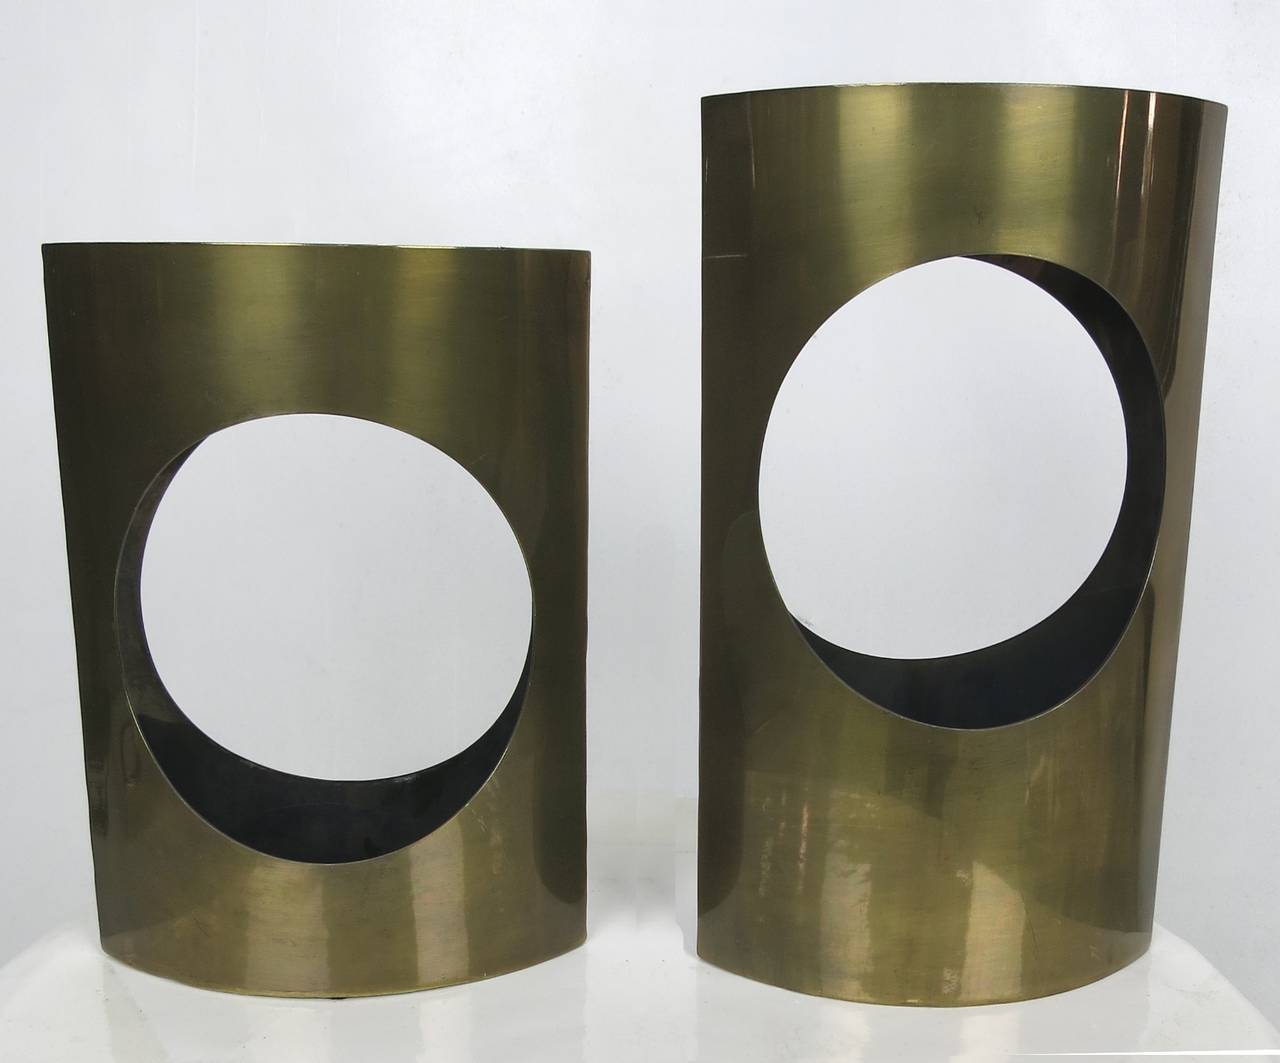 Matching pair, large and small brass ovoid vases each with a center cut open circle.

Dimension: Large vase: 12 x 3.5 x 7.
Small vase: 10 x 3 x 7.